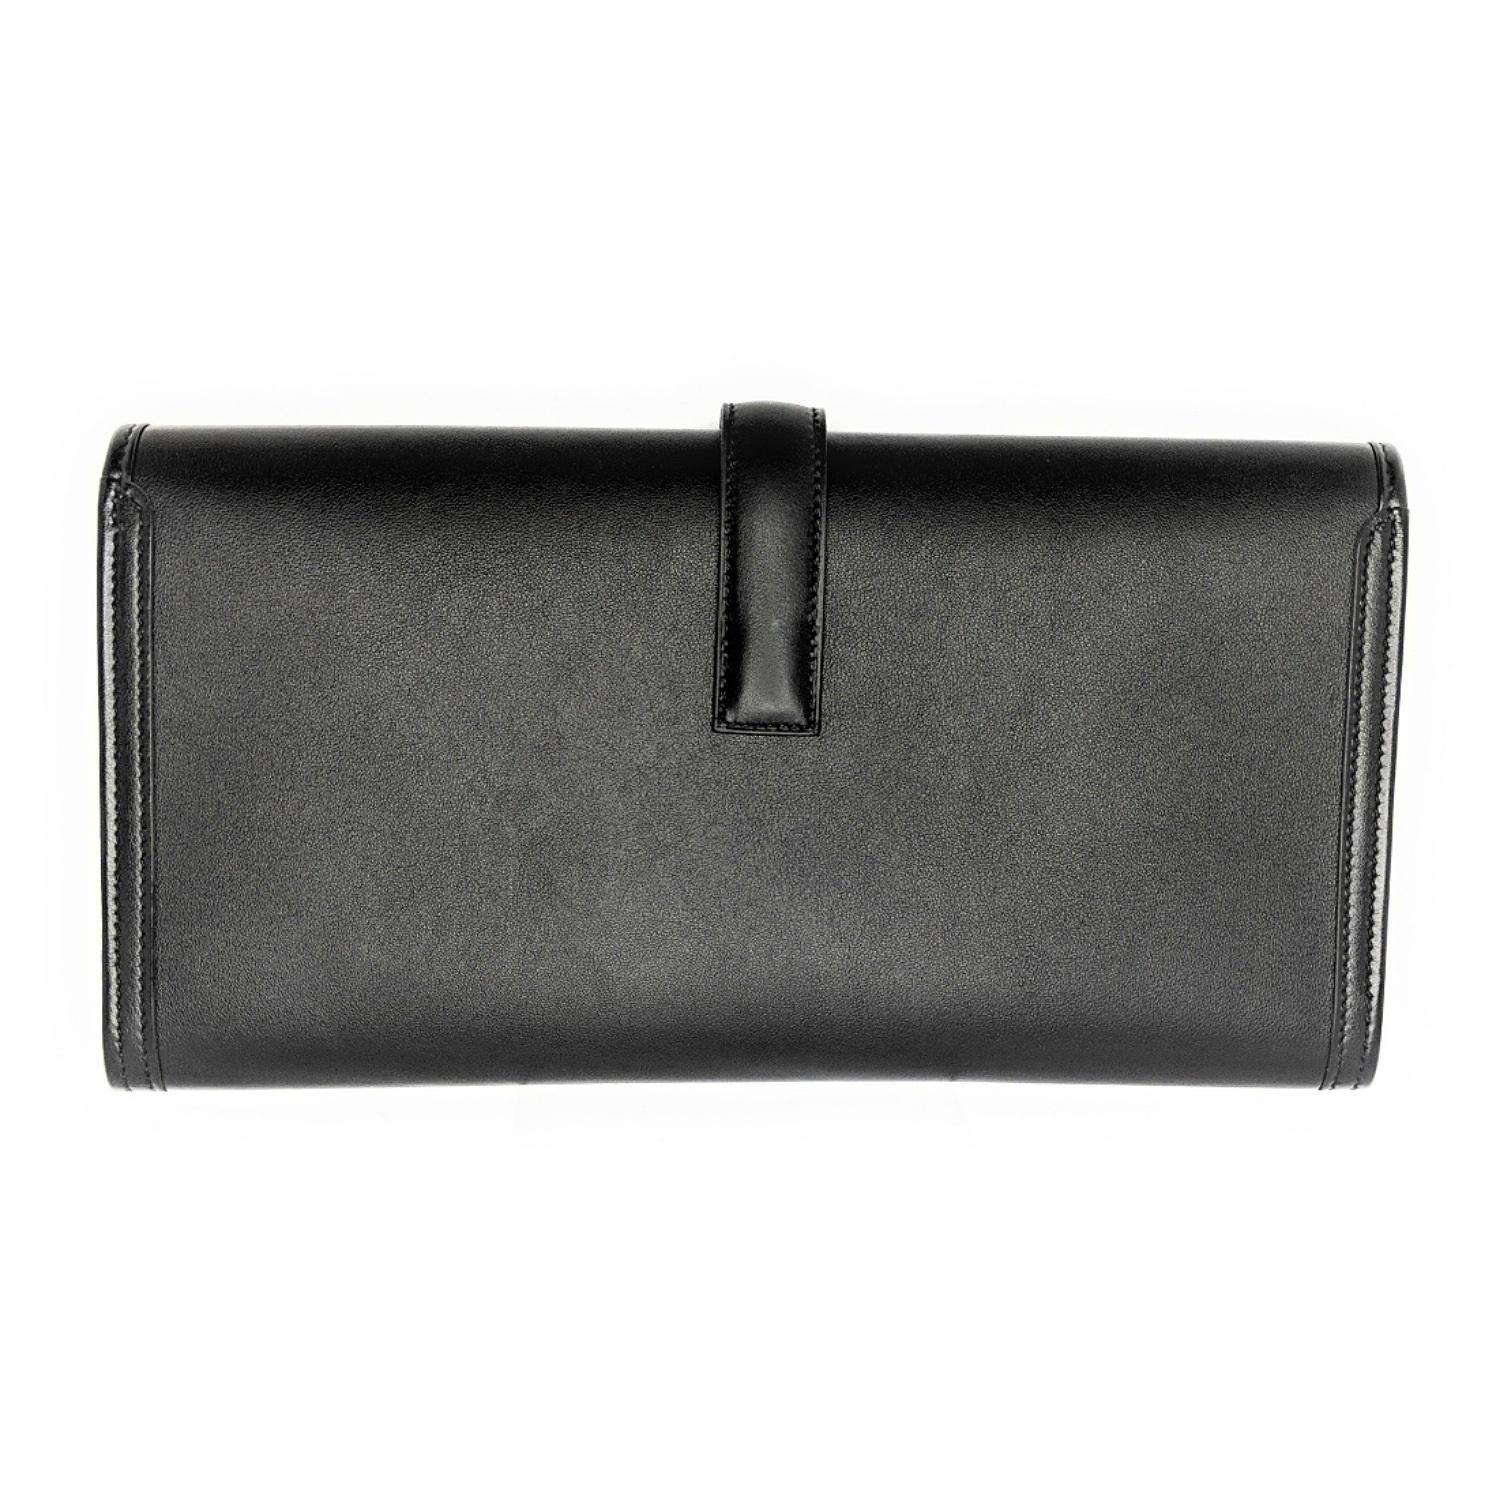 This gorgeous Hermès Jige Elan 29 Noir Swift Leather Clutch is the most elegant way to organize your essentials like your cash, currency, credit cards and is great for a night out. It features gorgeous Swift leather in a stunning black color with a